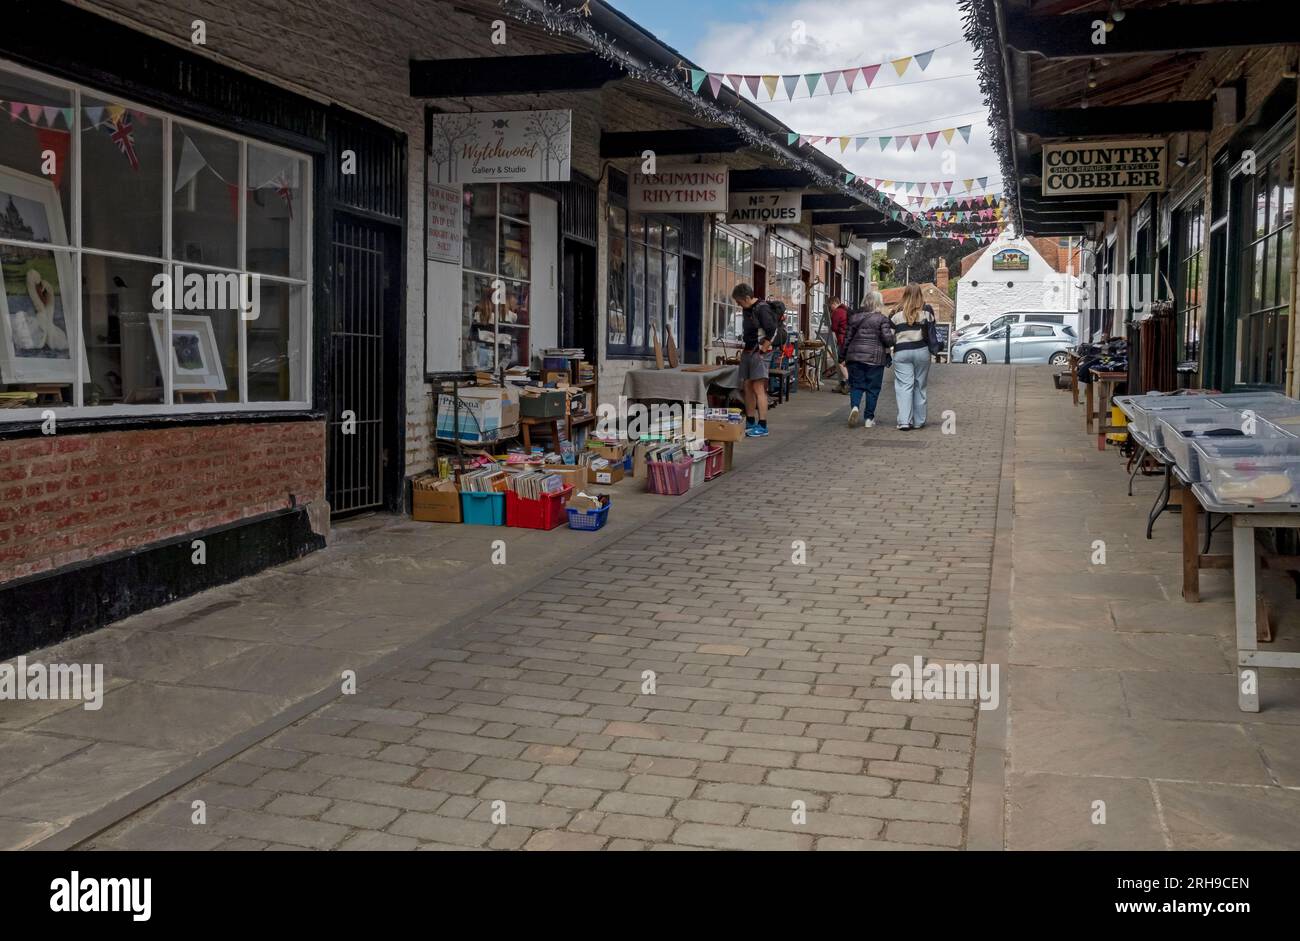 Row of shops stores local independent businesses in The Shambles in summer Malton North Yorkshire England UK United Kingdom GB Great Britain Stock Photo